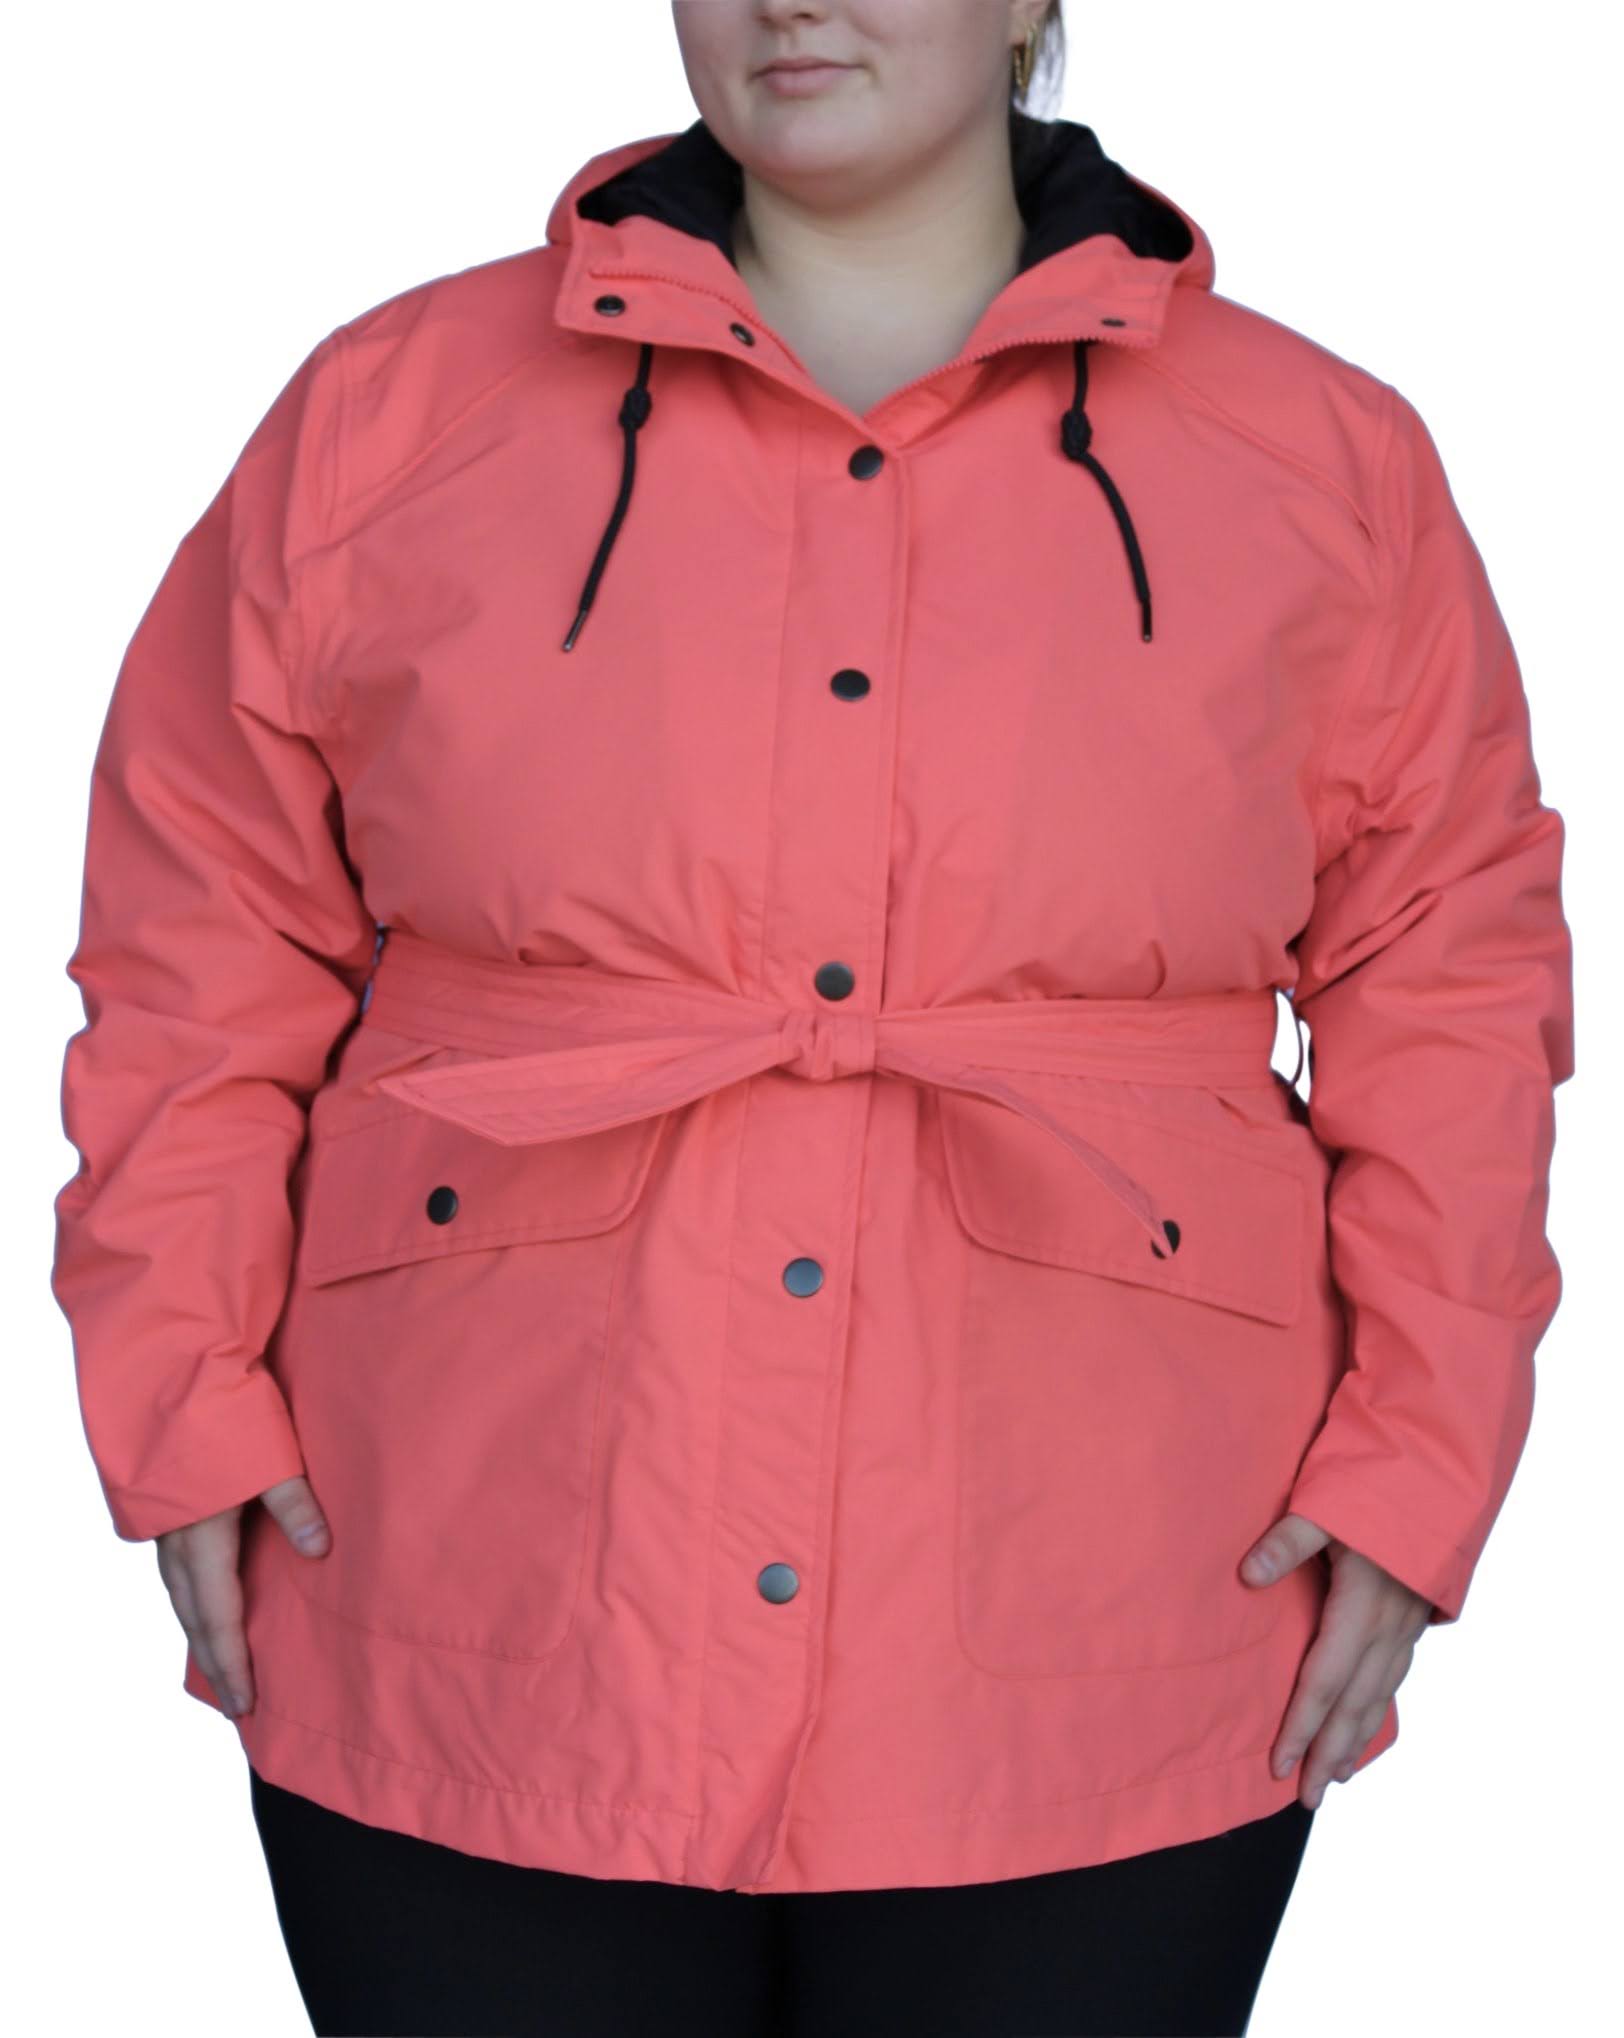 Snow Country Outerwear Women's Plus Size Short Trench Rain Jacket Coat 1X-6X - image 1 of 5